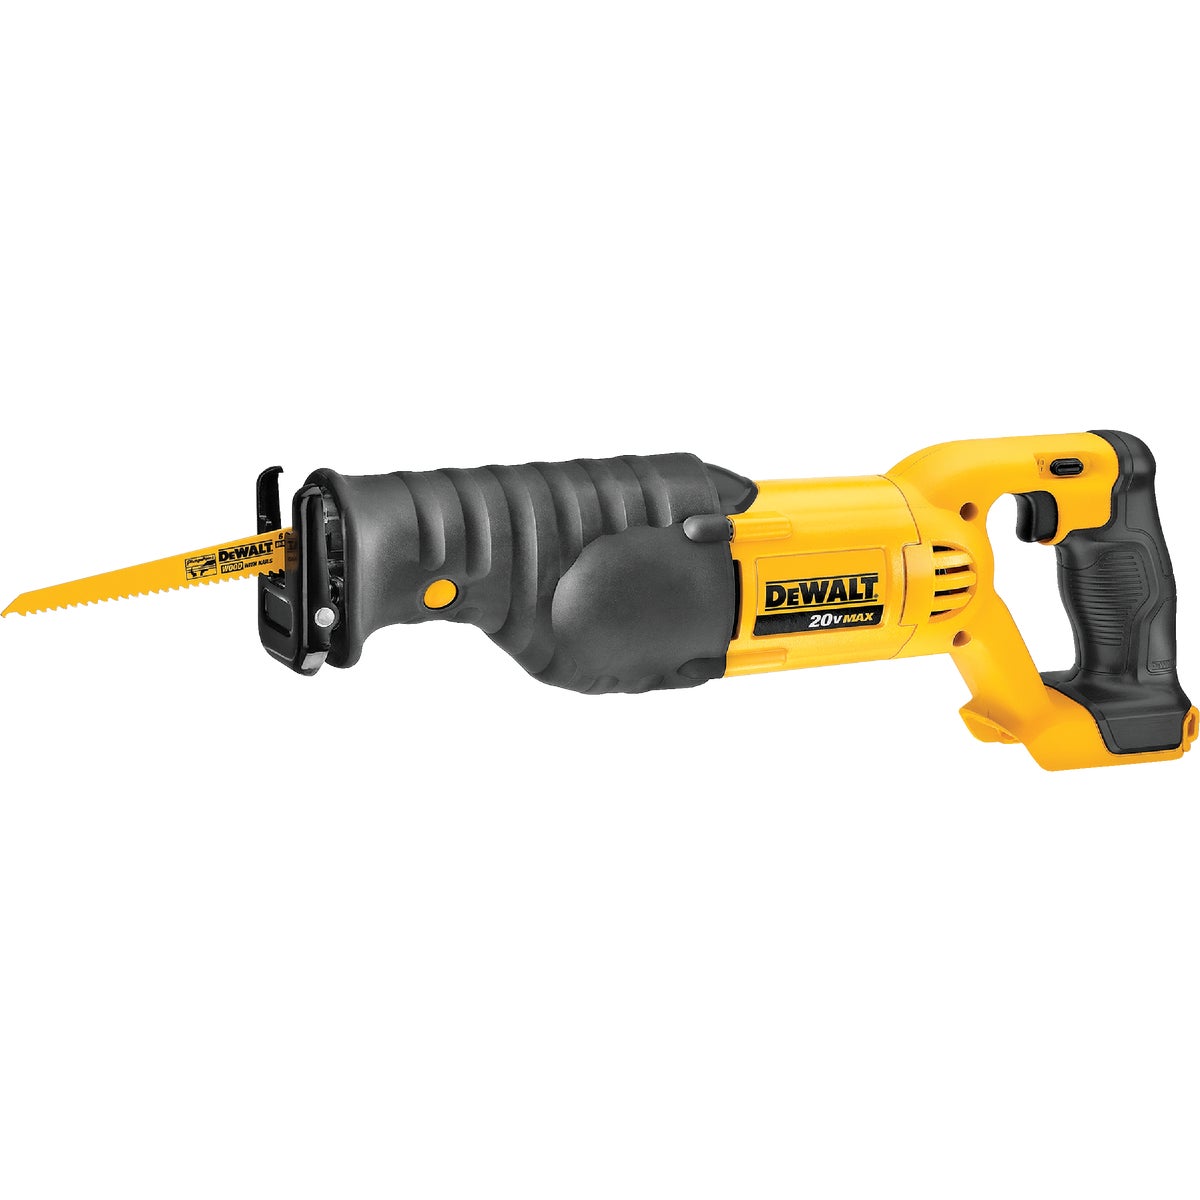 DEWALT 20 Volt MAX Lithium-Ion Cordless Reciprocating Saw (Tool Only)